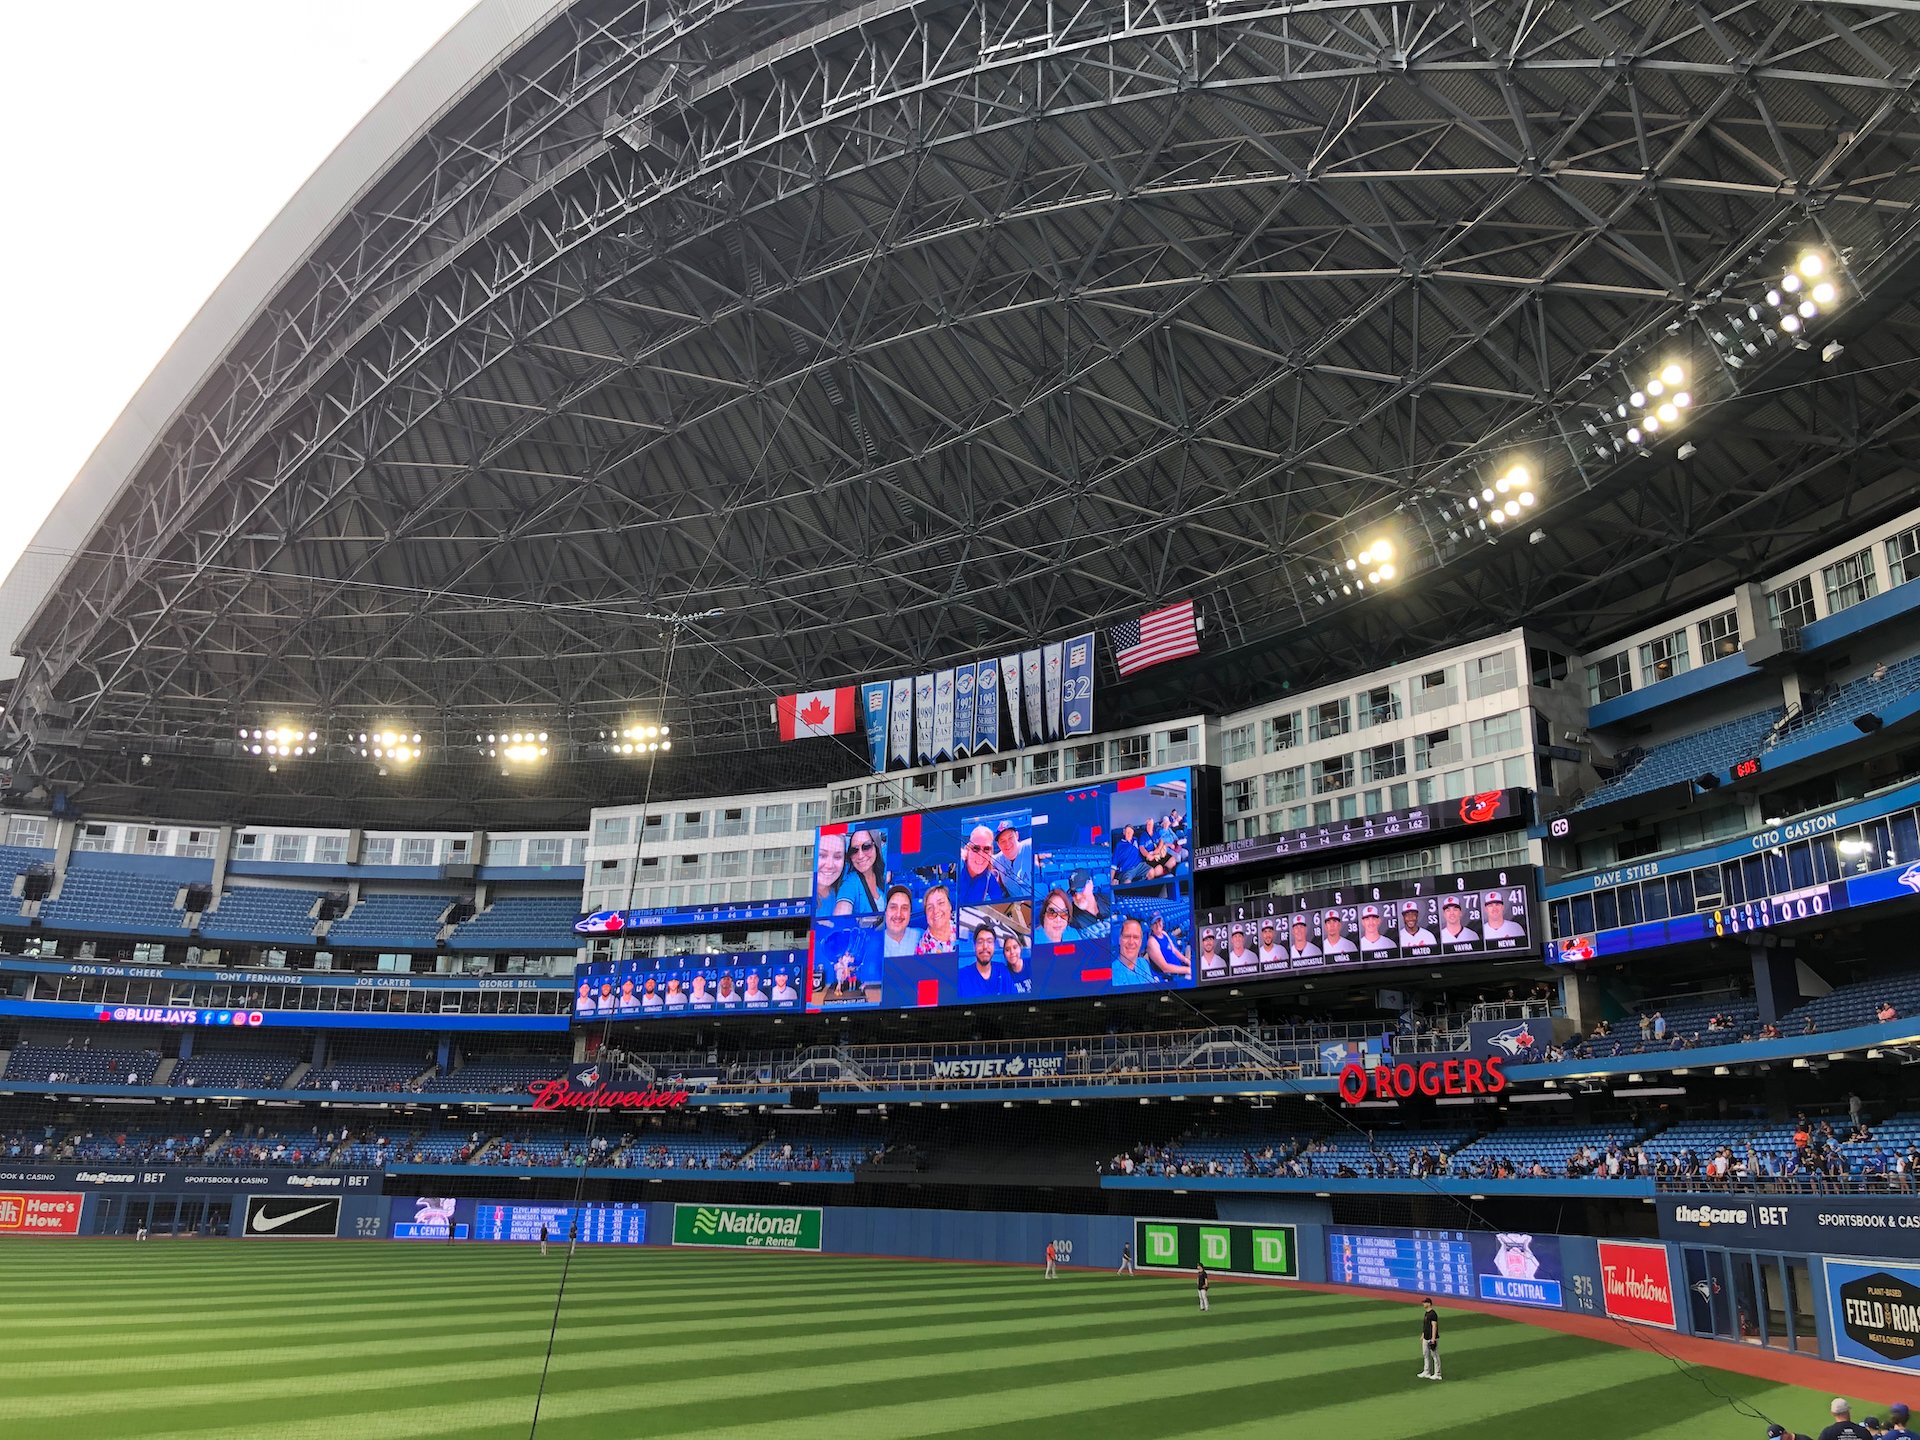  It had been quite a while since I had last been to a Jays game. 